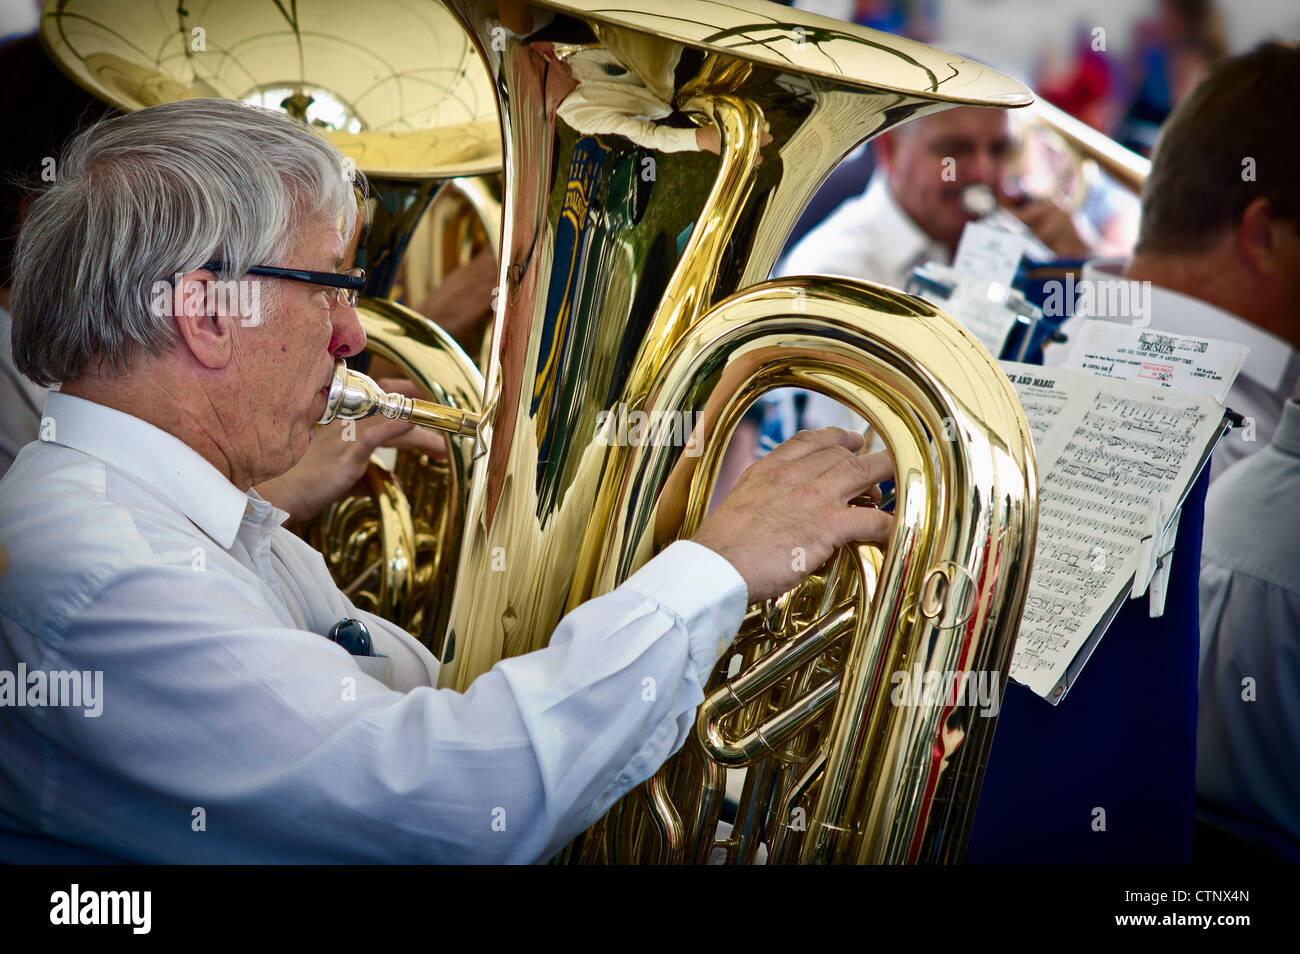 Ibstock Brick Brass Band with tuba or euphonium player in the foreground Stock Photo